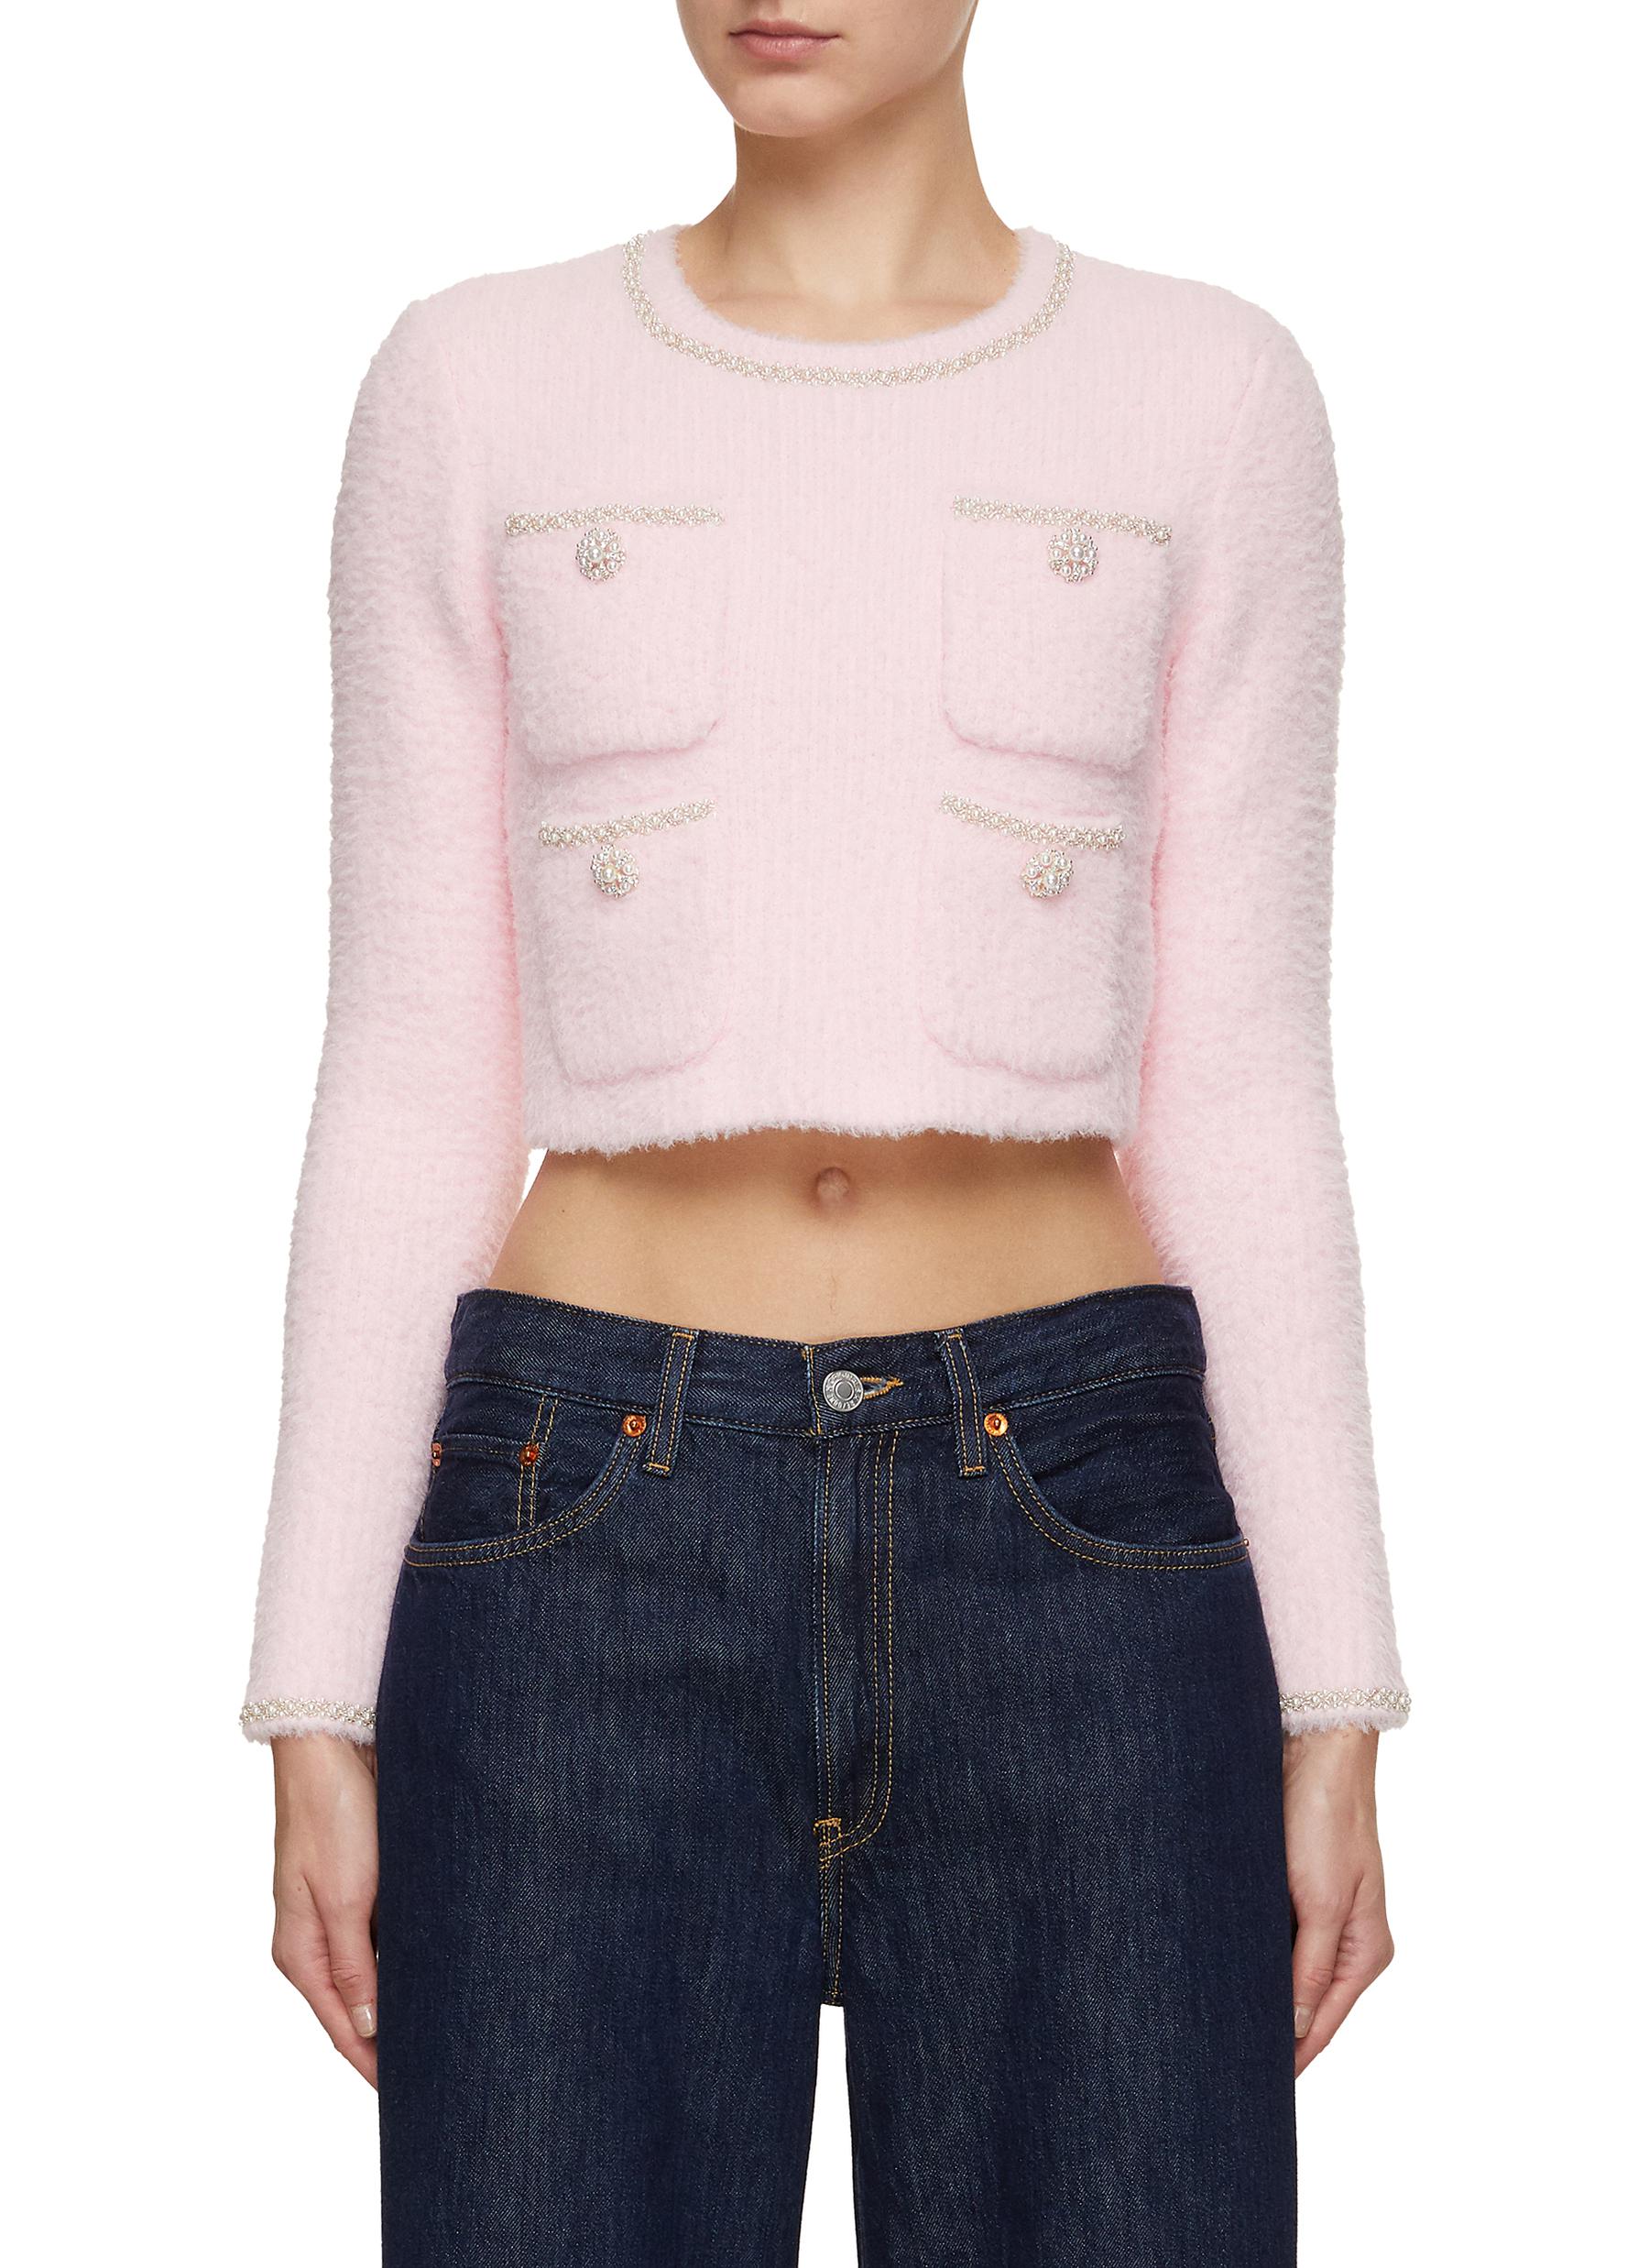 Pearl and Crystal Embellished Knit Top